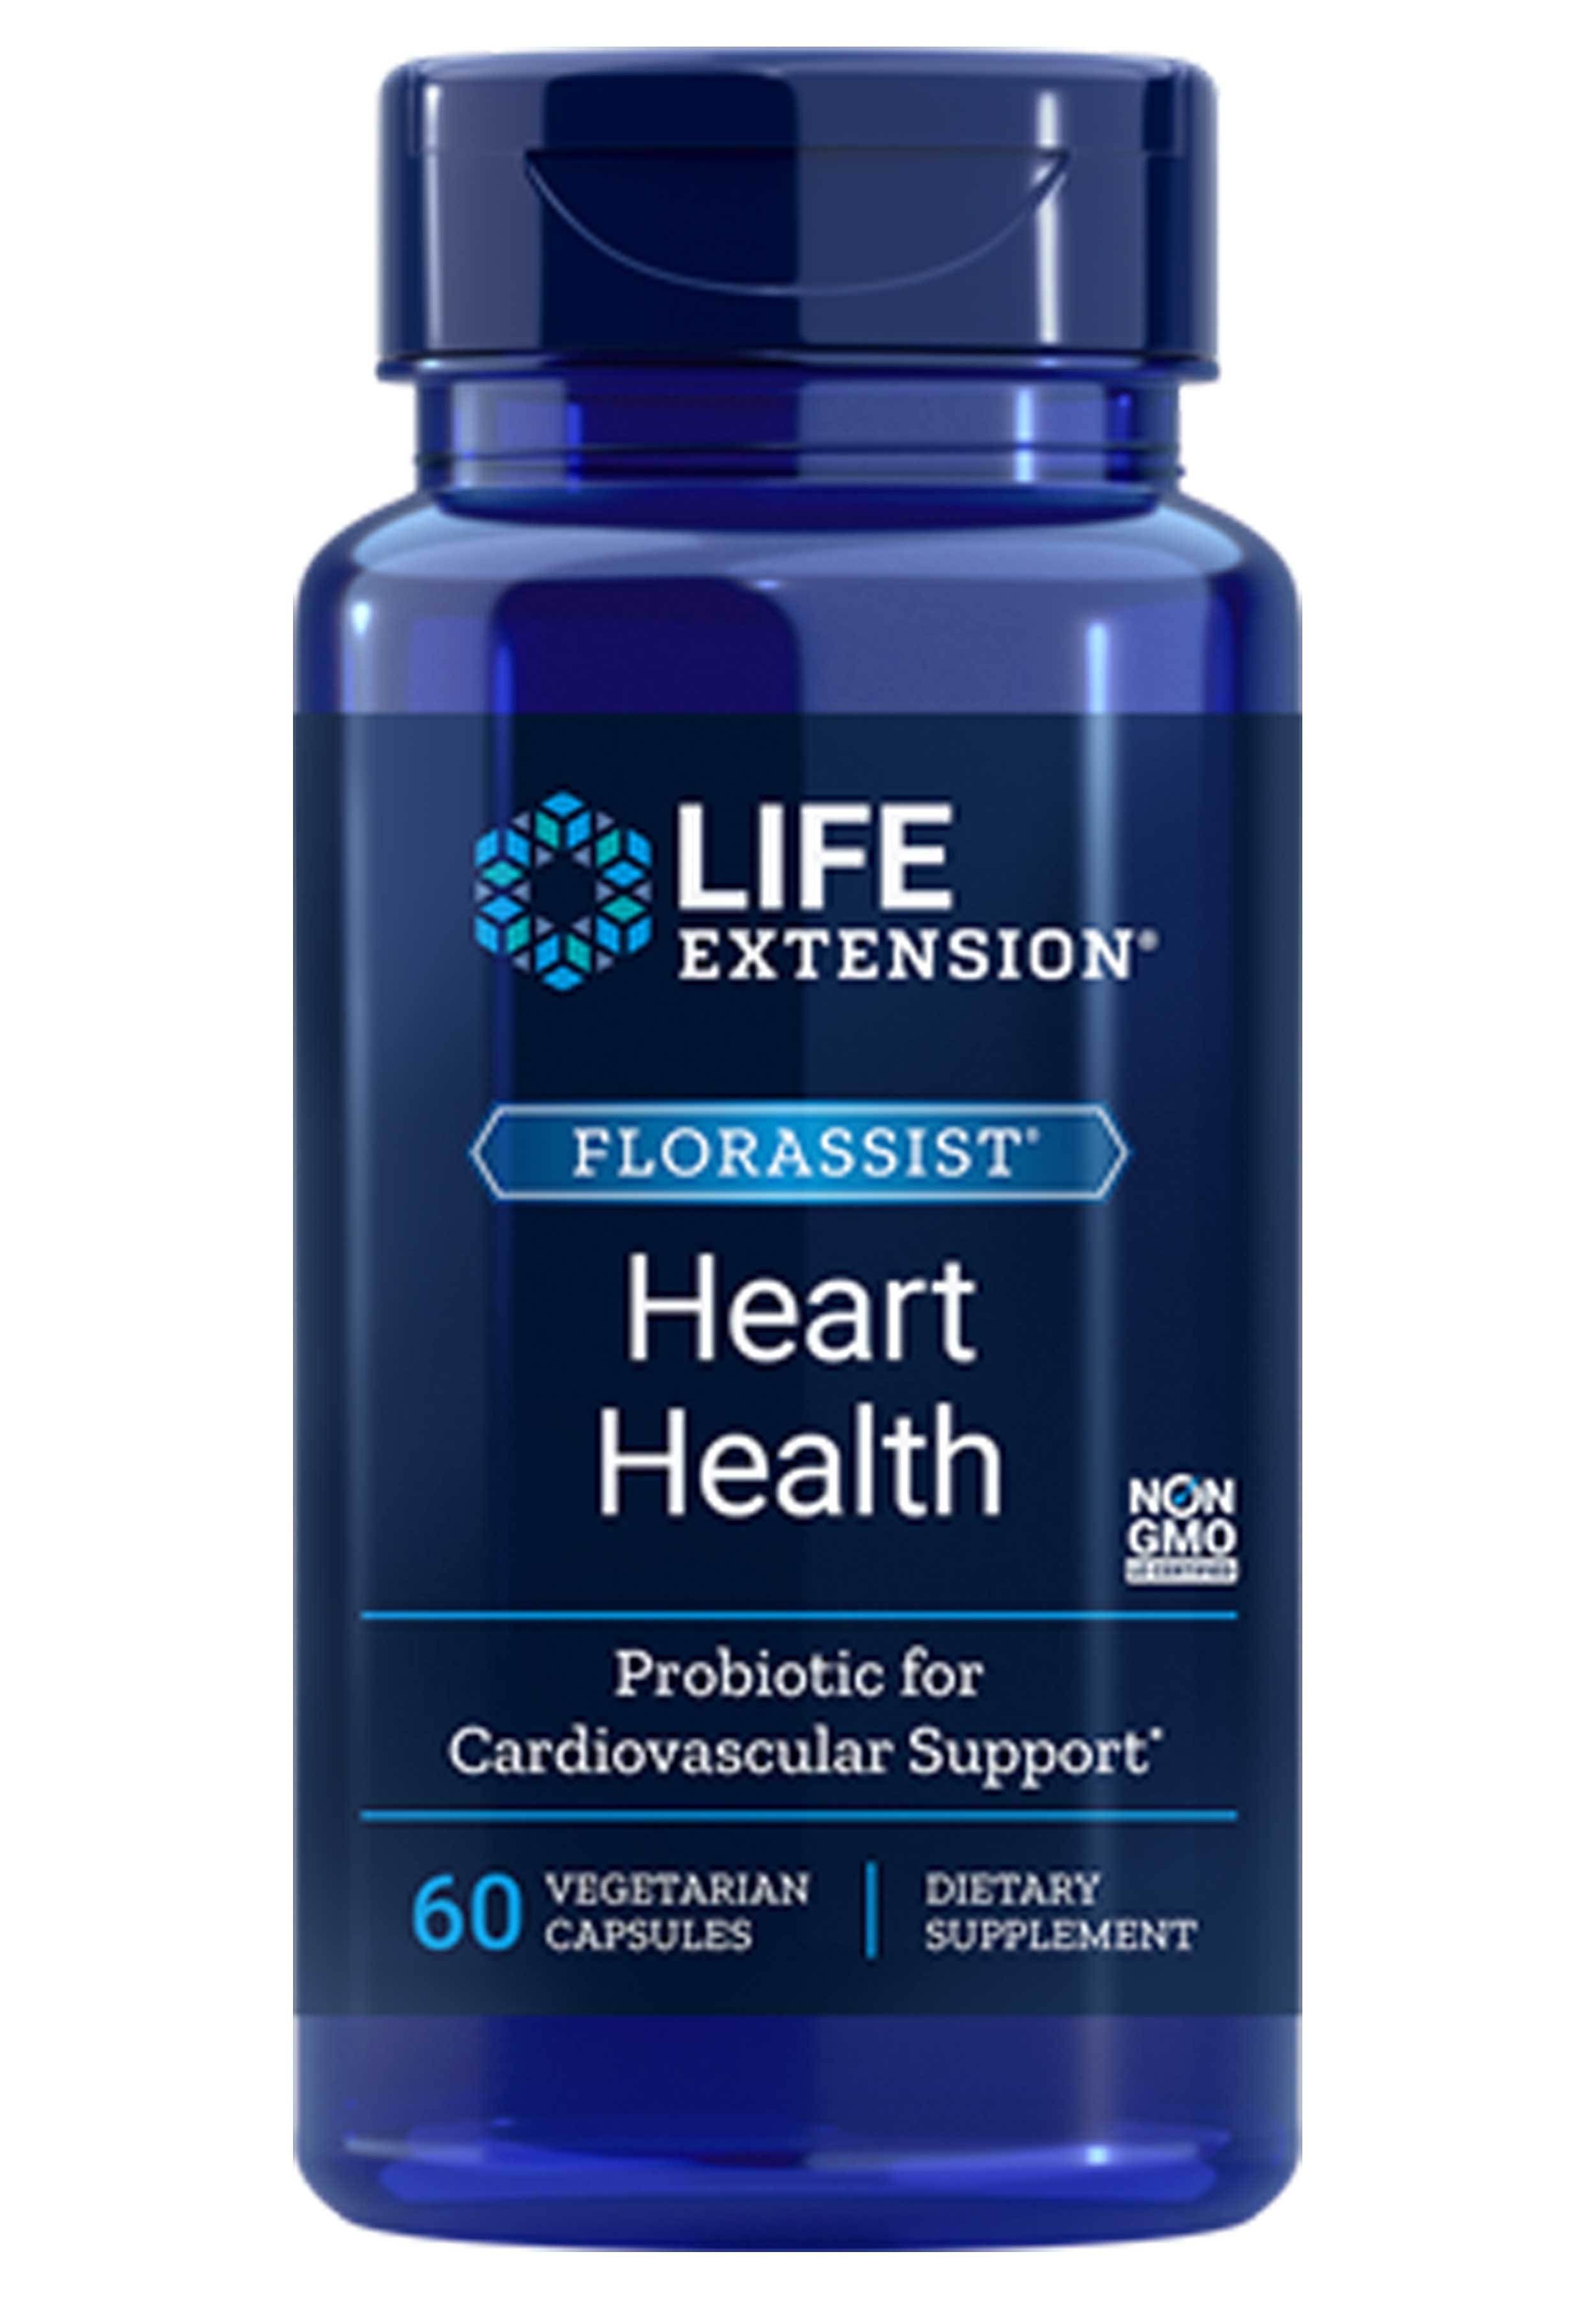 Life Extension FLORASSIST Heart Health